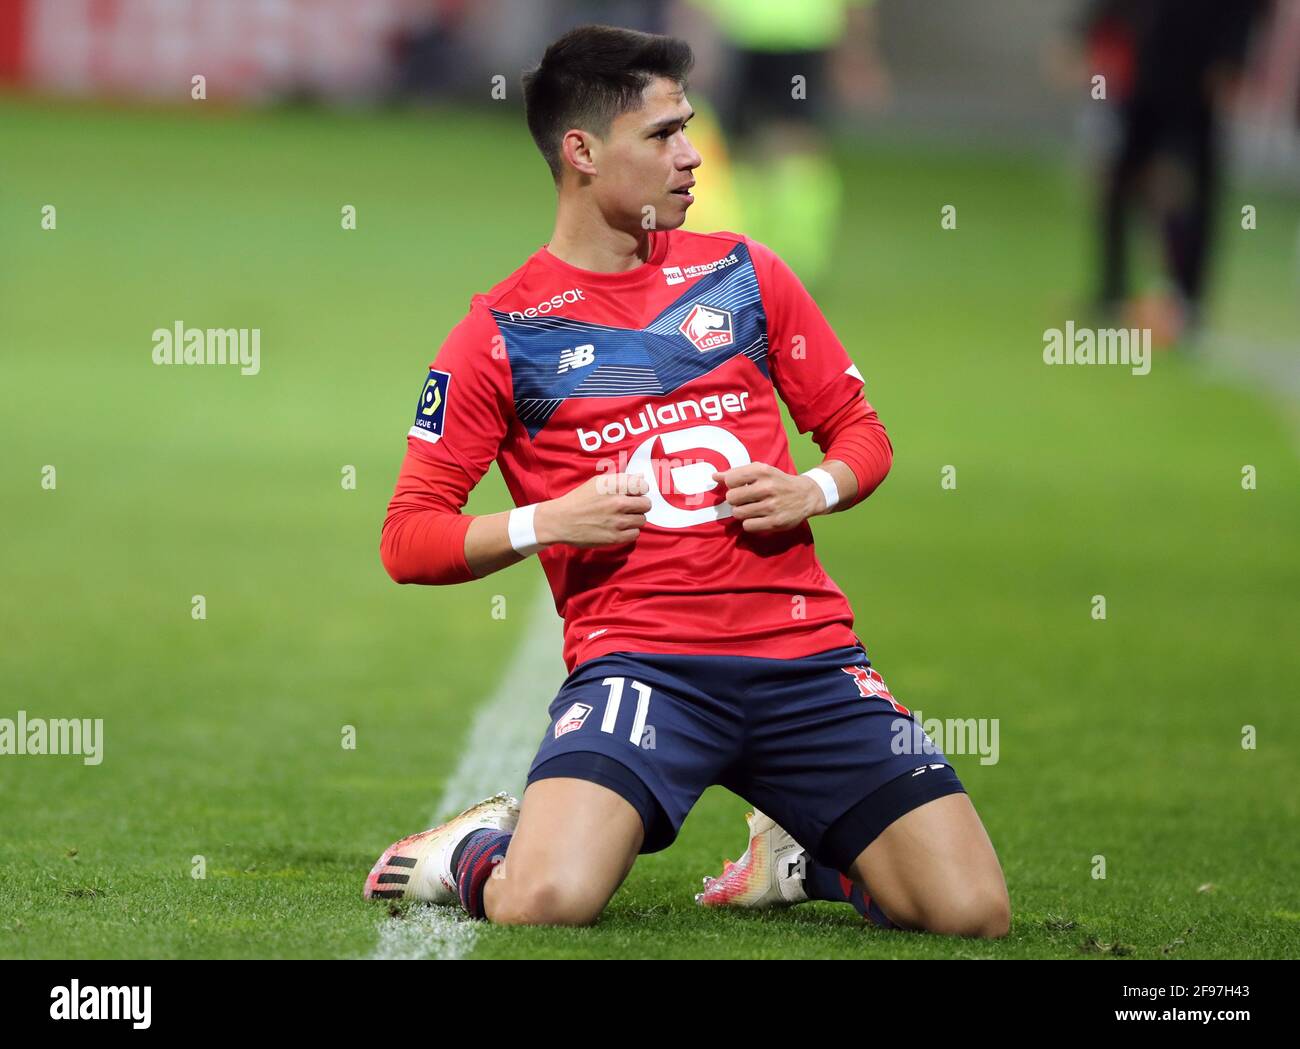 Soccer Football - Ligue 1 - Lille v Montpellier - Stade Pierre-Mauroy, Lille,  France - April 16, 2021 Lille's Luiz Araujo celebrates scoring their first  goal REUTERS/Pascal Rossignol Stock Photo - Alamy